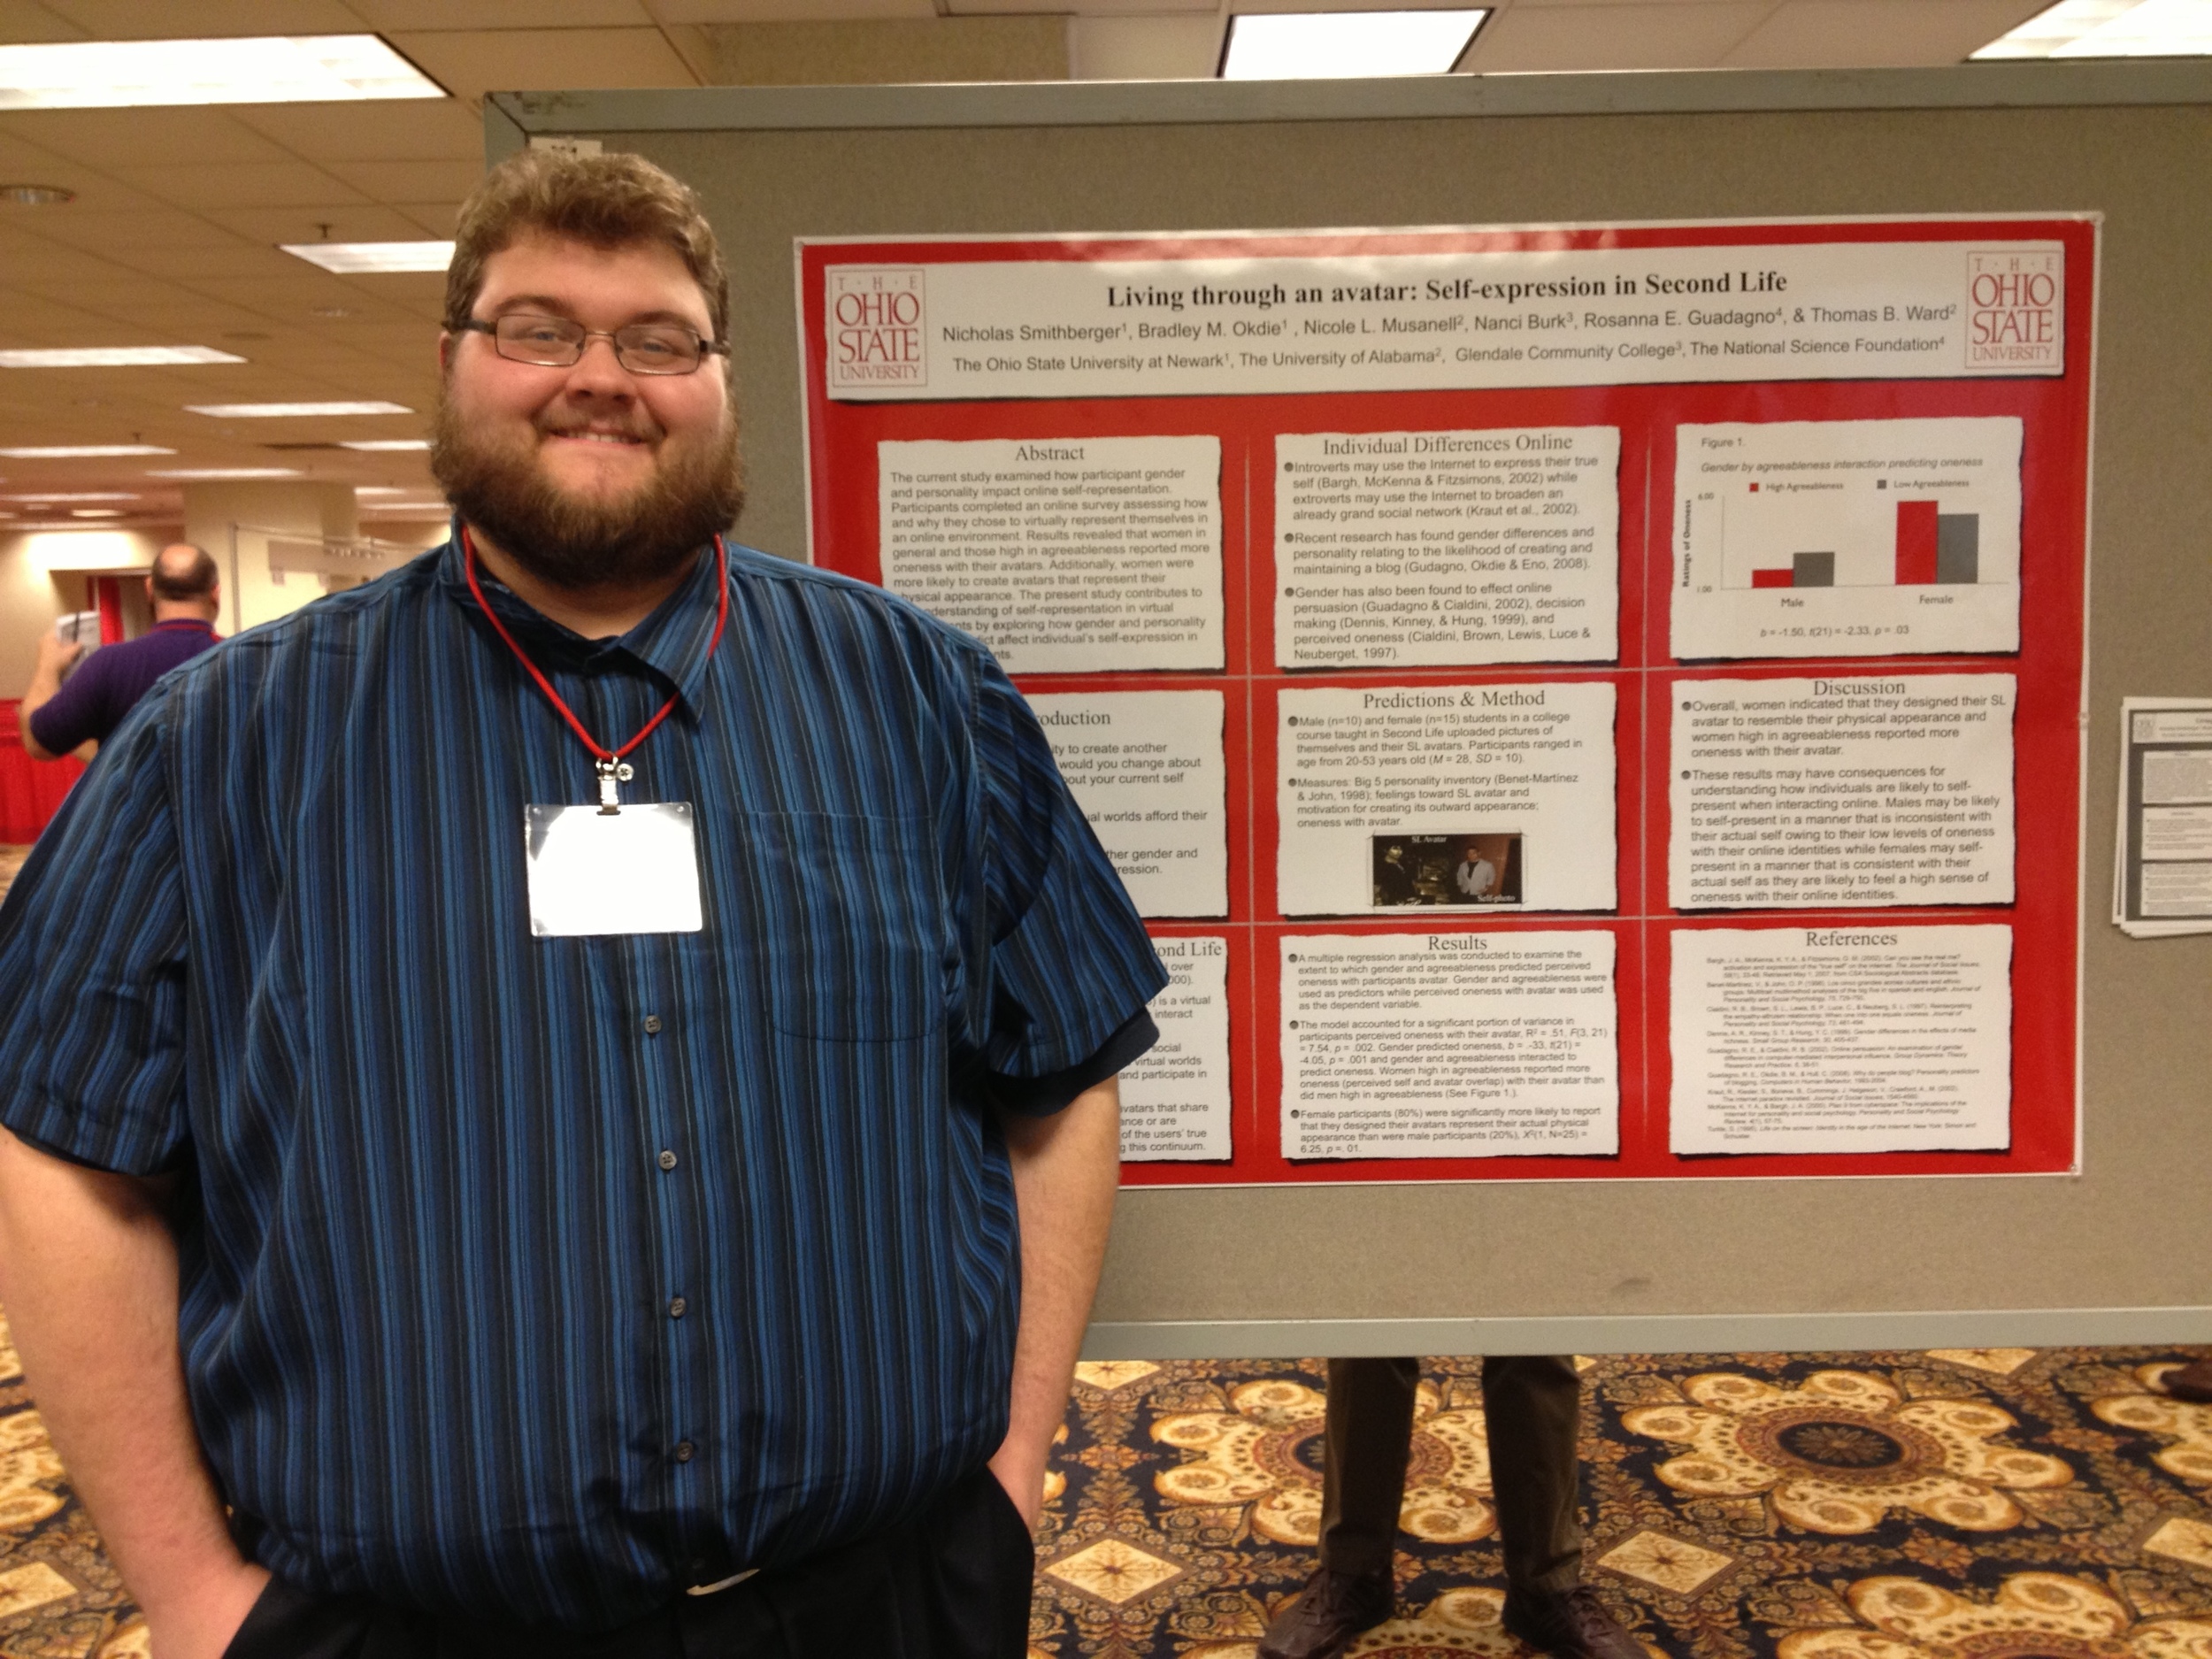  Research assistant Nick Smithberger presenting research at the Midwestern Psychological Association. 